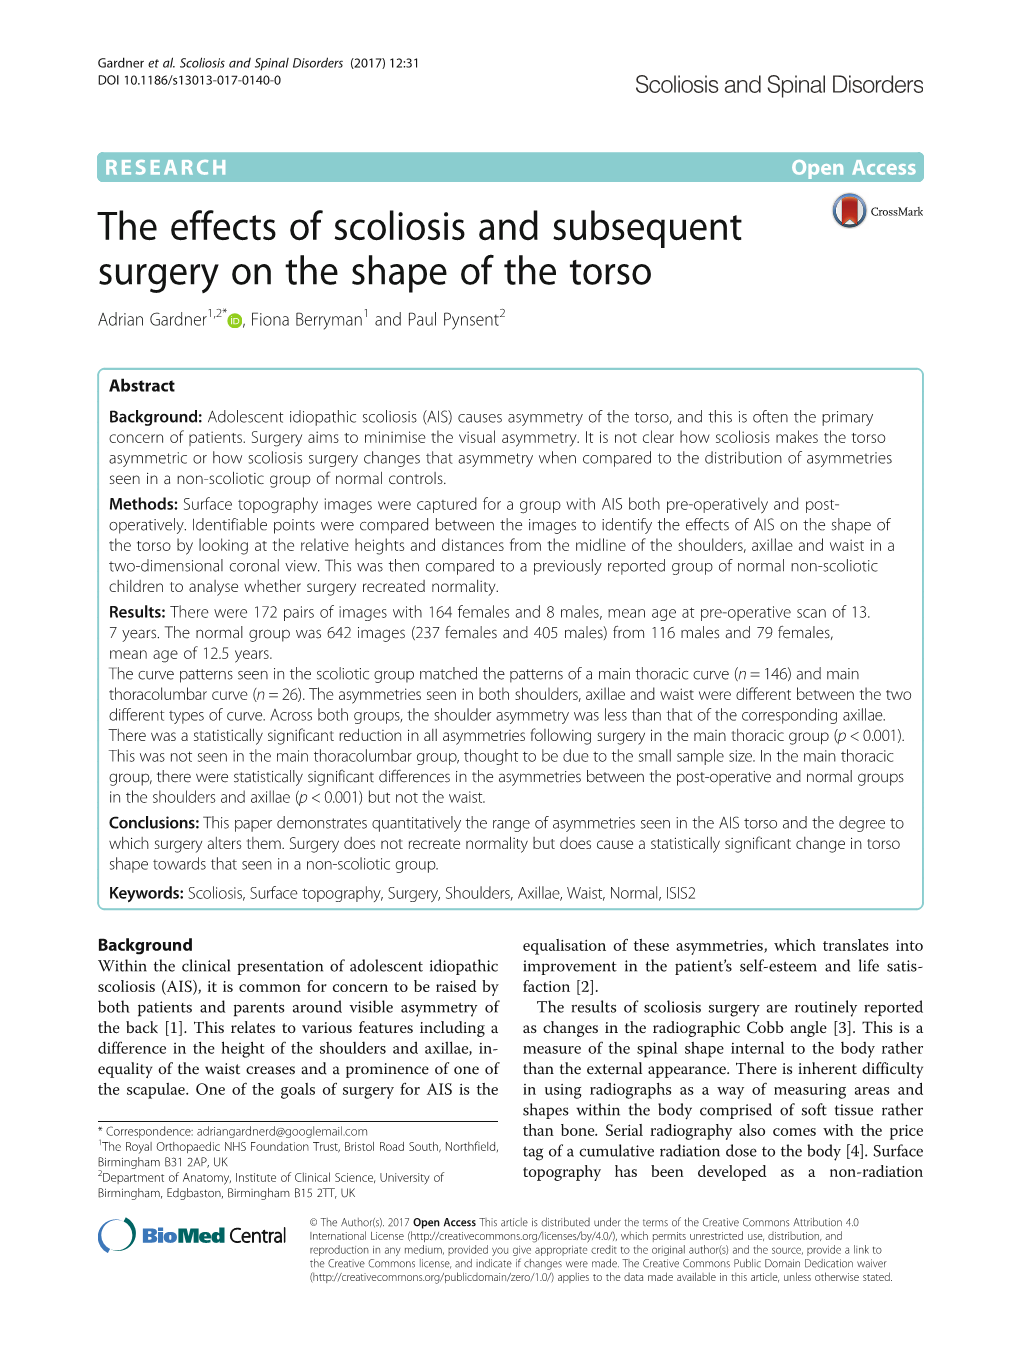 The Effects of Scoliosis and Subsequent Surgery on the Shape of the Torso Adrian Gardner1,2* , Fiona Berryman1 and Paul Pynsent2